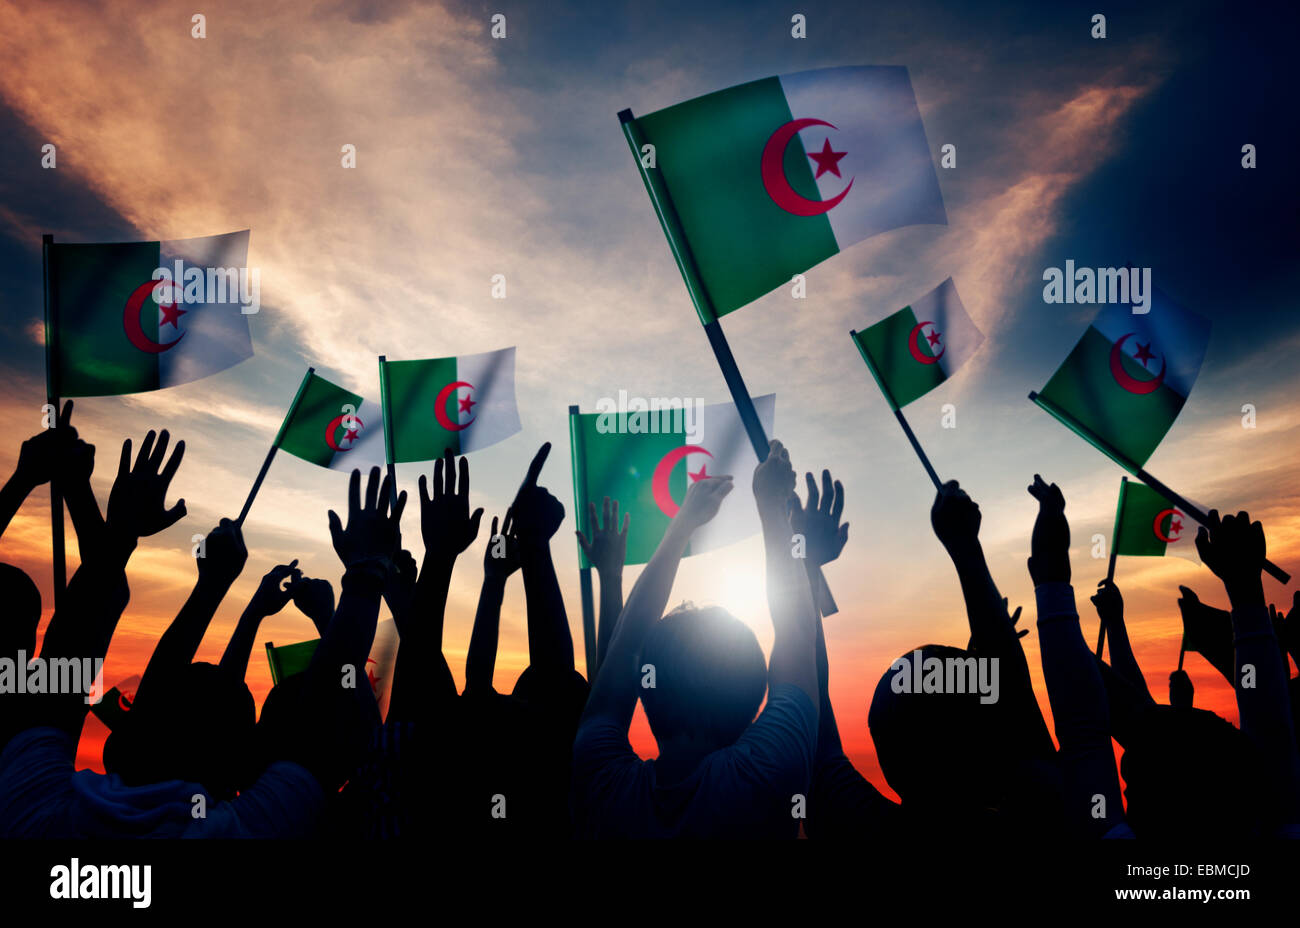 Silhouettes of People Holding Flag of Algeria Stock Photo